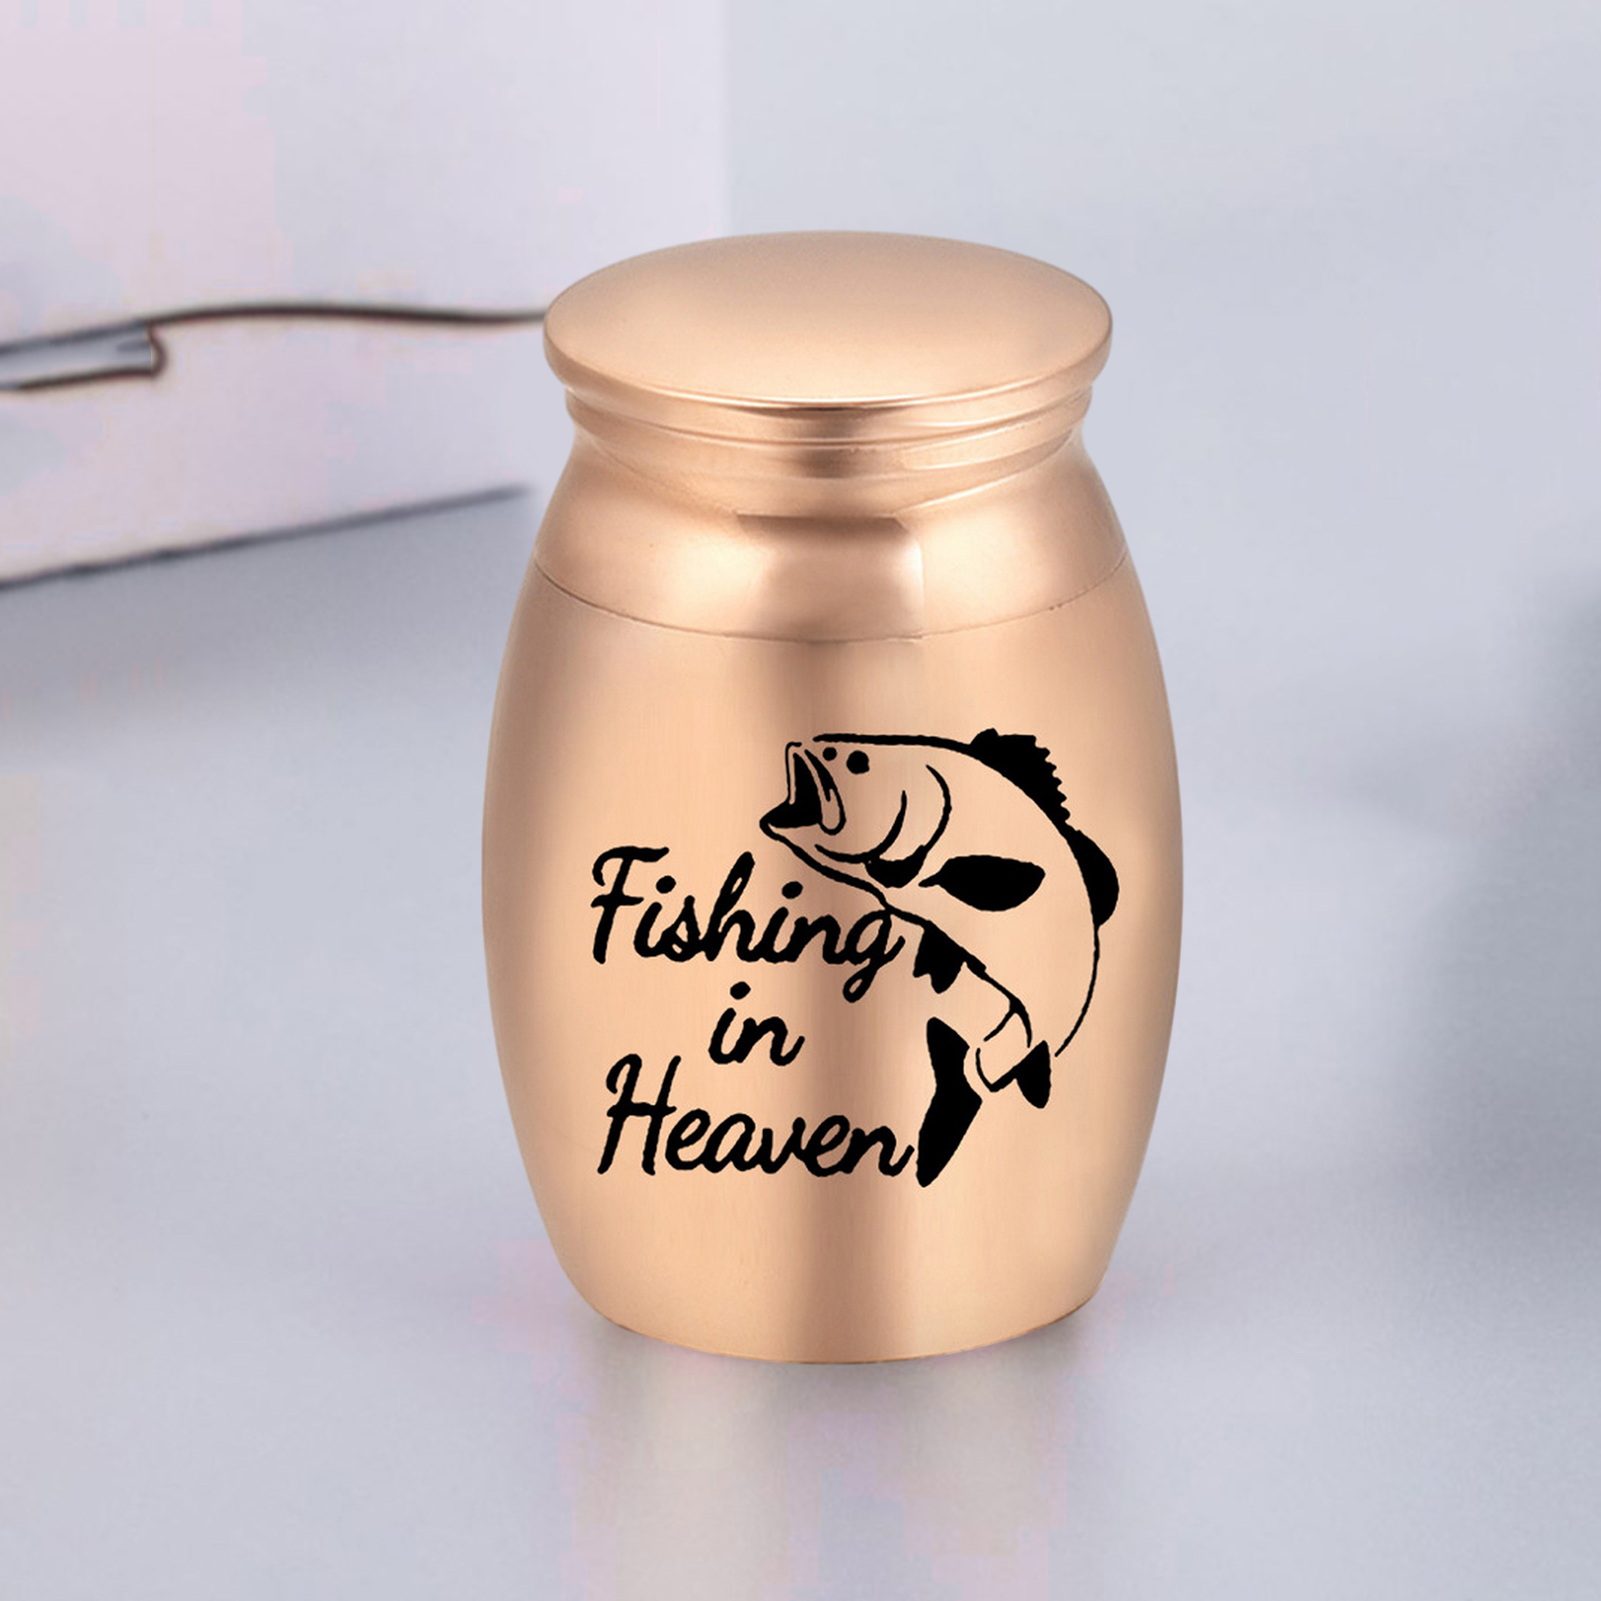 Zelans Pocket-sized Pet Urn Easy-to-carry Pet Urn Heavenly Fishing Pet Urn  Small Metal Cremation Box for Dog/cat Ashes Beautiful Memorial Keepsake  with Printed Thread Lid Ideal